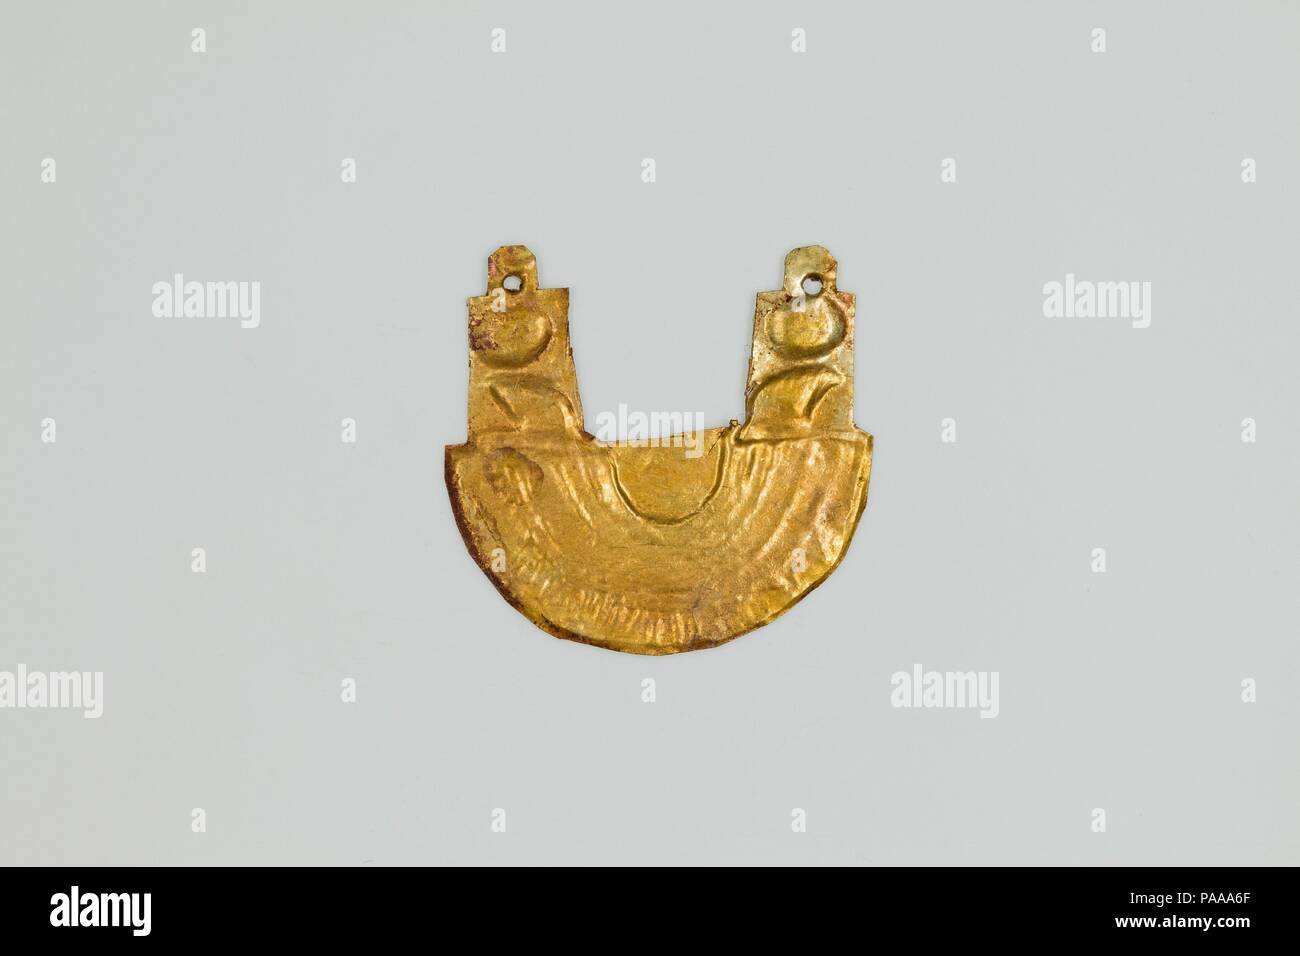 Falcon-headed collar amulet. Dimensions: l. 2.3 cm (7/8 in.) × h. 2.2 cm (7/8 in.). Dynasty: Dynasty 26-29. Date: 664-380 B.C.. Museum: Metropolitan Museum of Art, New York, USA. Stock Photo